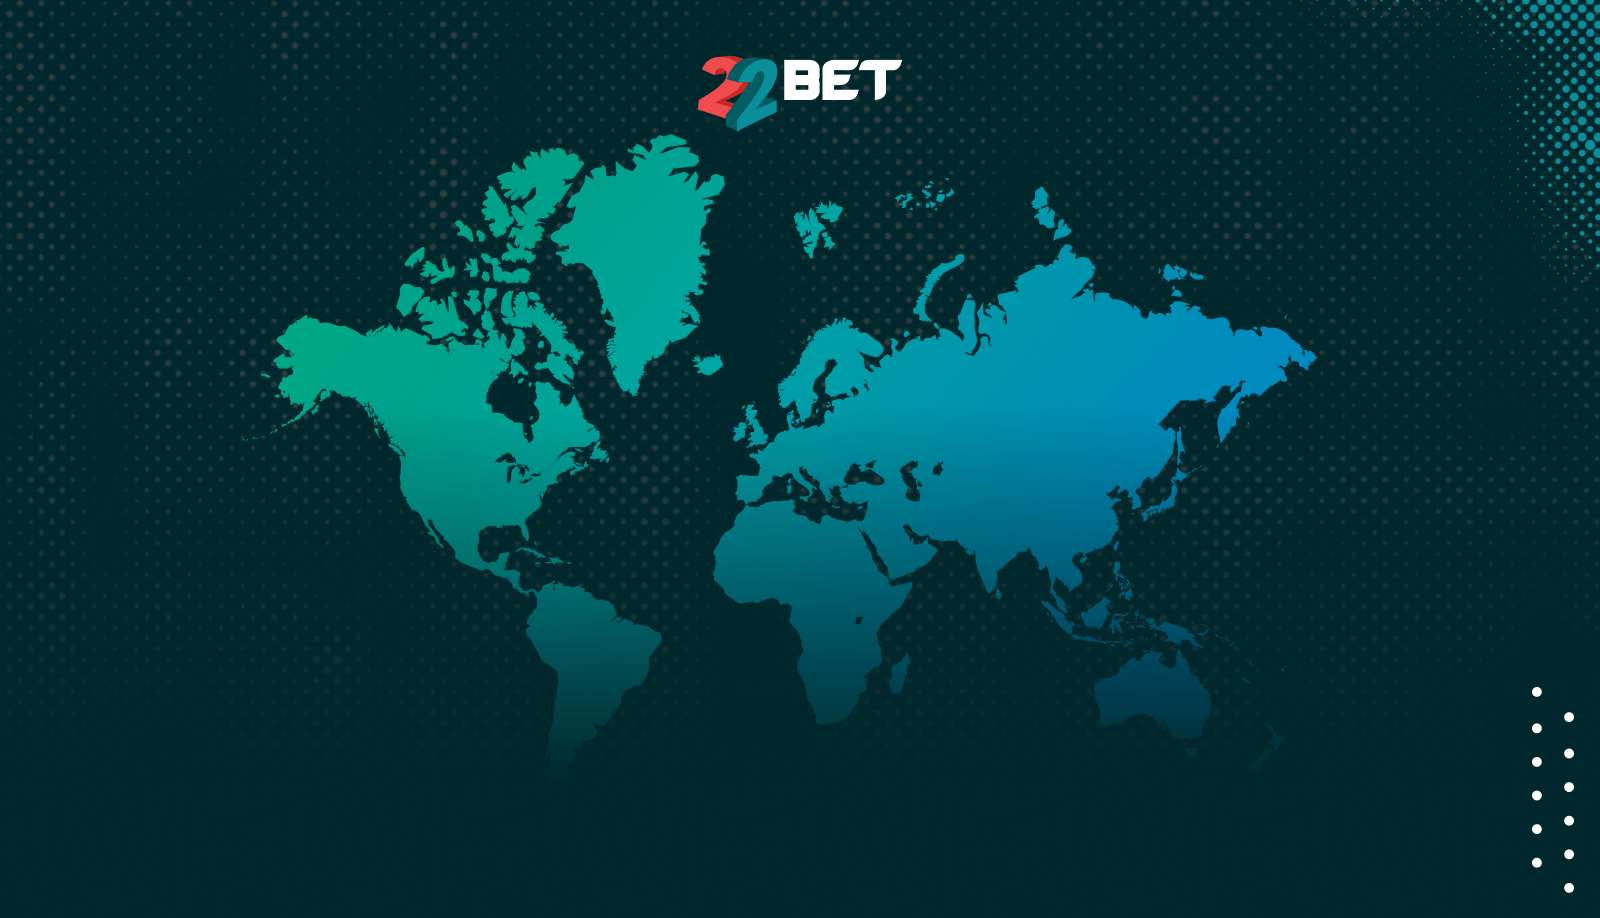 Sports Betting Regulations and Licensing Around The World